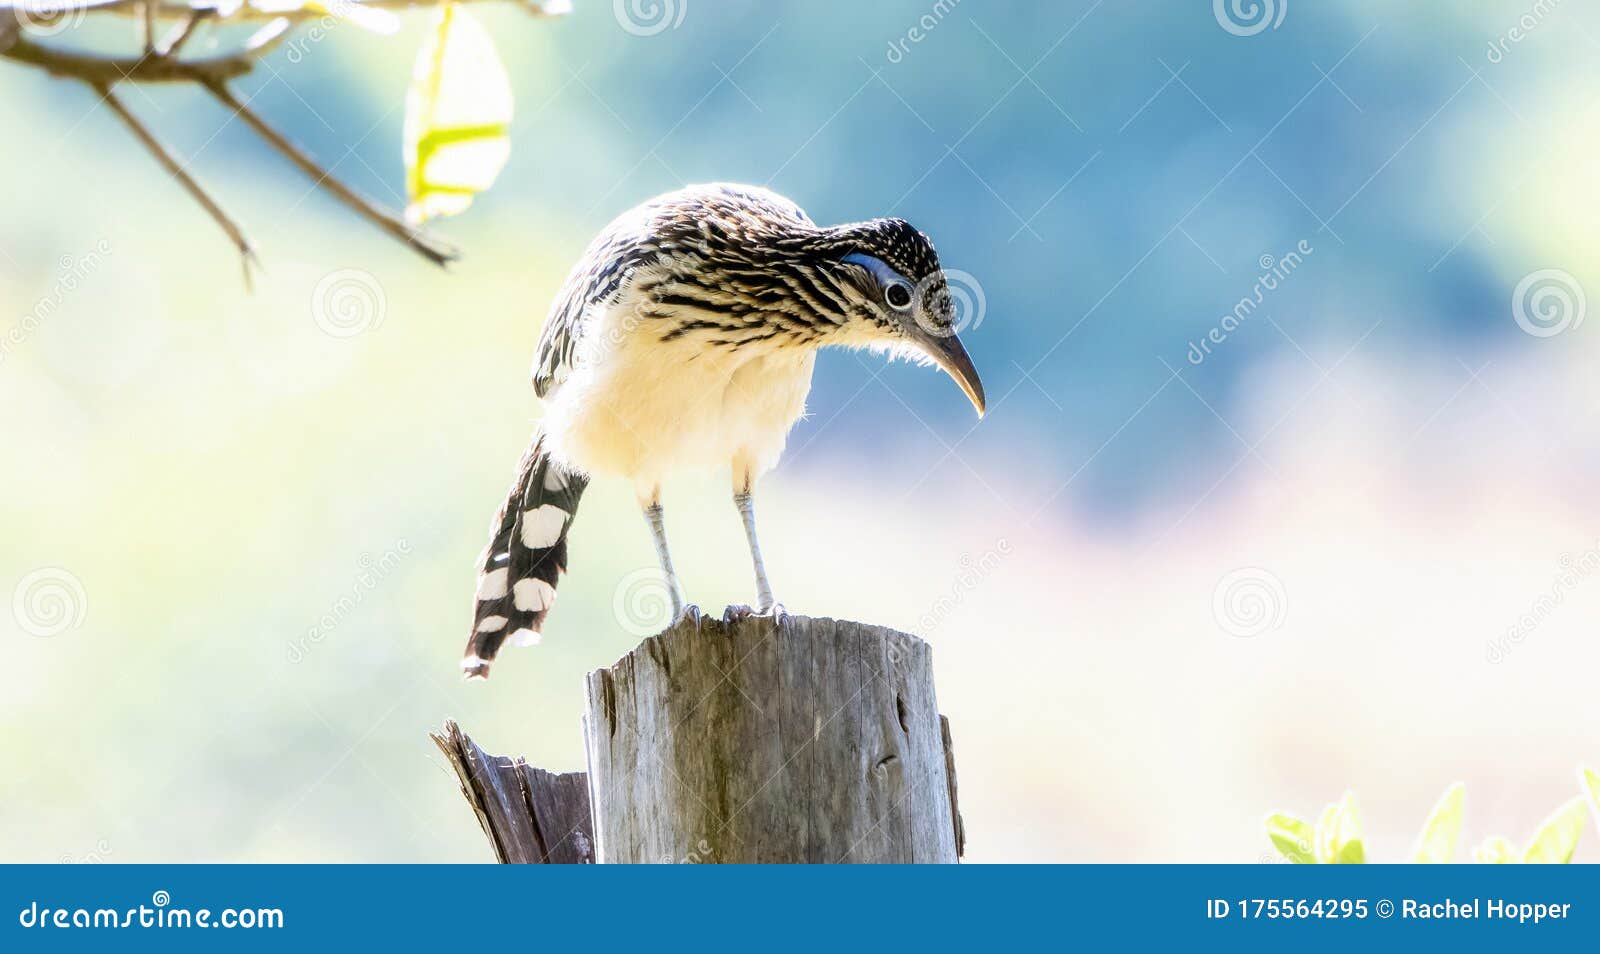 a rare colorful lesser roadrunner geococcyx velox perched on a post in jalisco, mexico